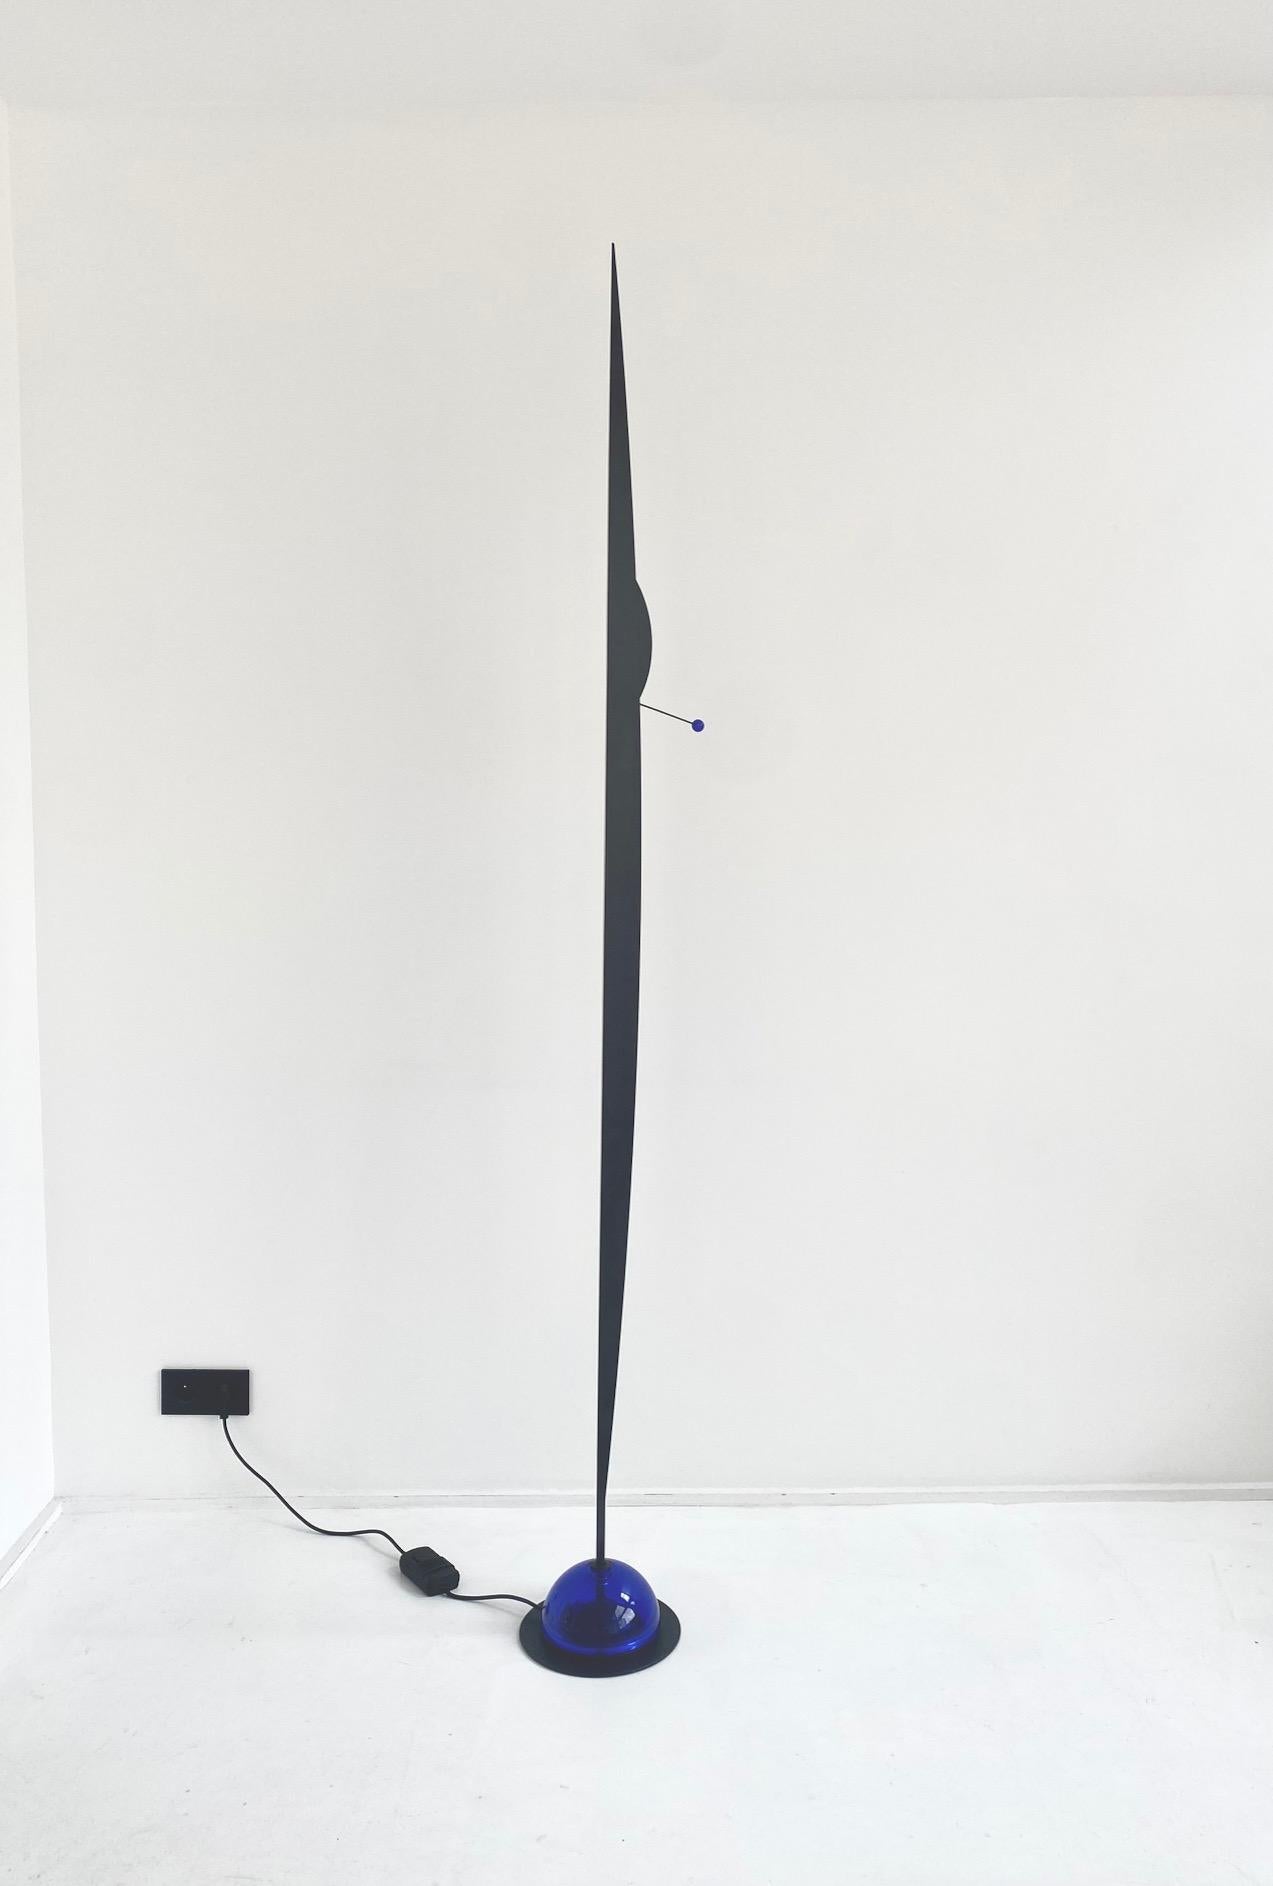 

Gilles Derain flame floor lamp, Lumen Center, 1980s

Flame floor lamp by Gilles Derain, French design, 1986.
Structure in matt black painted steel and foot in blue murano glass. 
Dimmable light system.